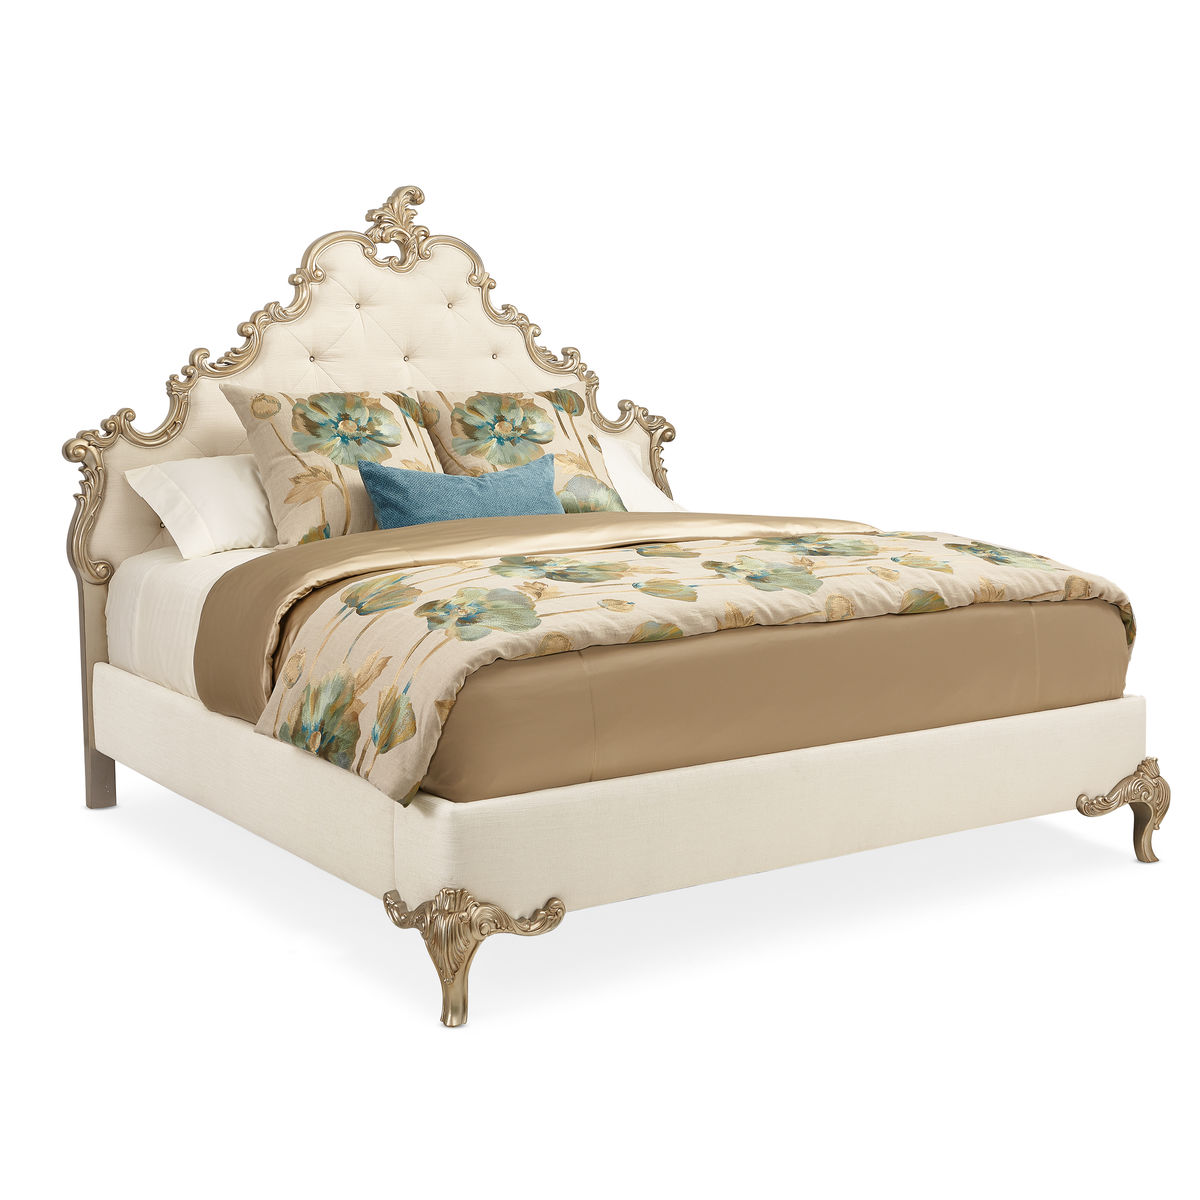 Panel Bed - King